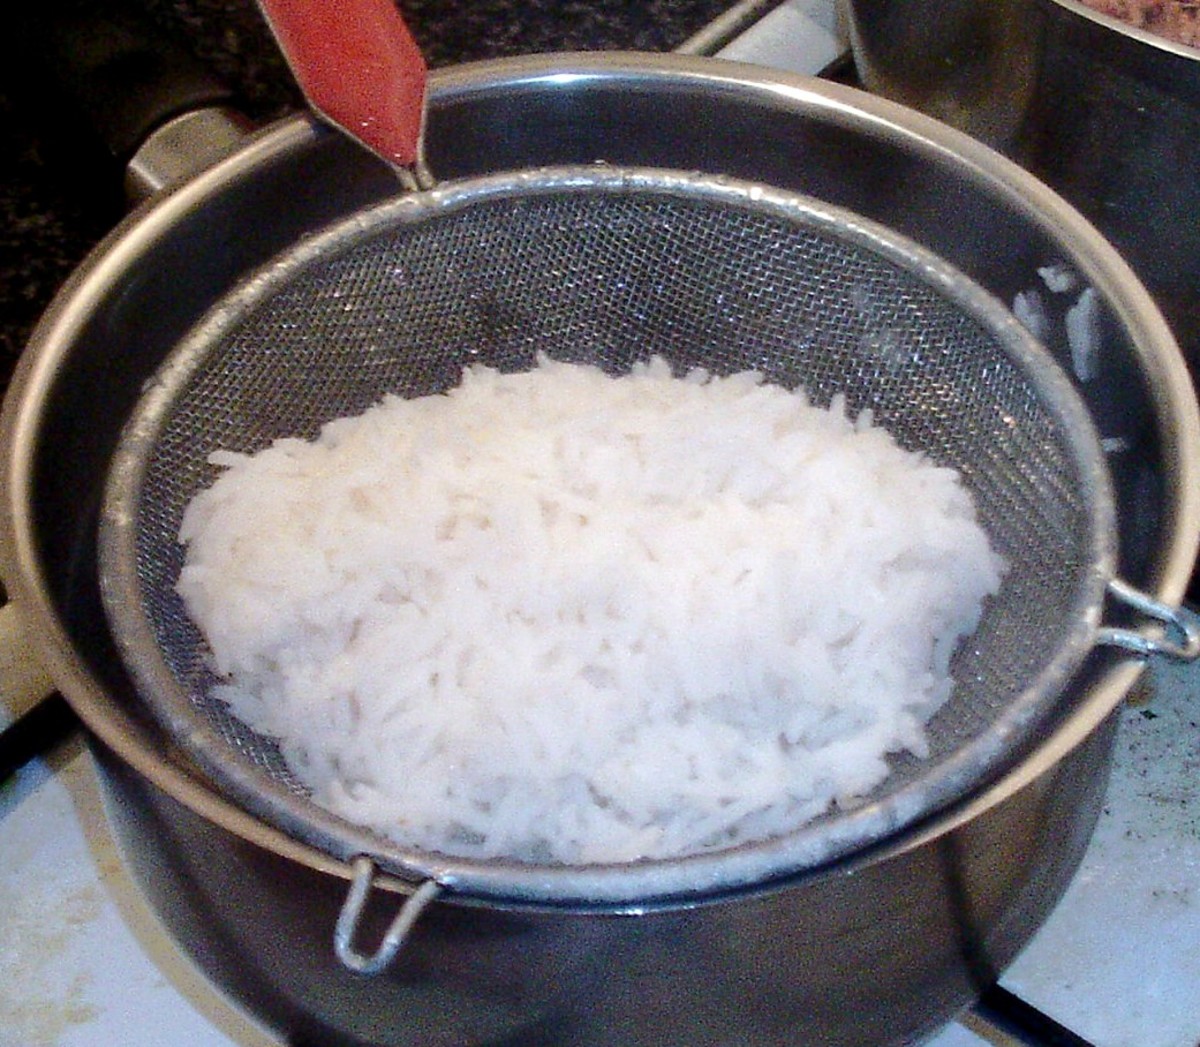 Rice is drained and left to steam off for a few minutes.